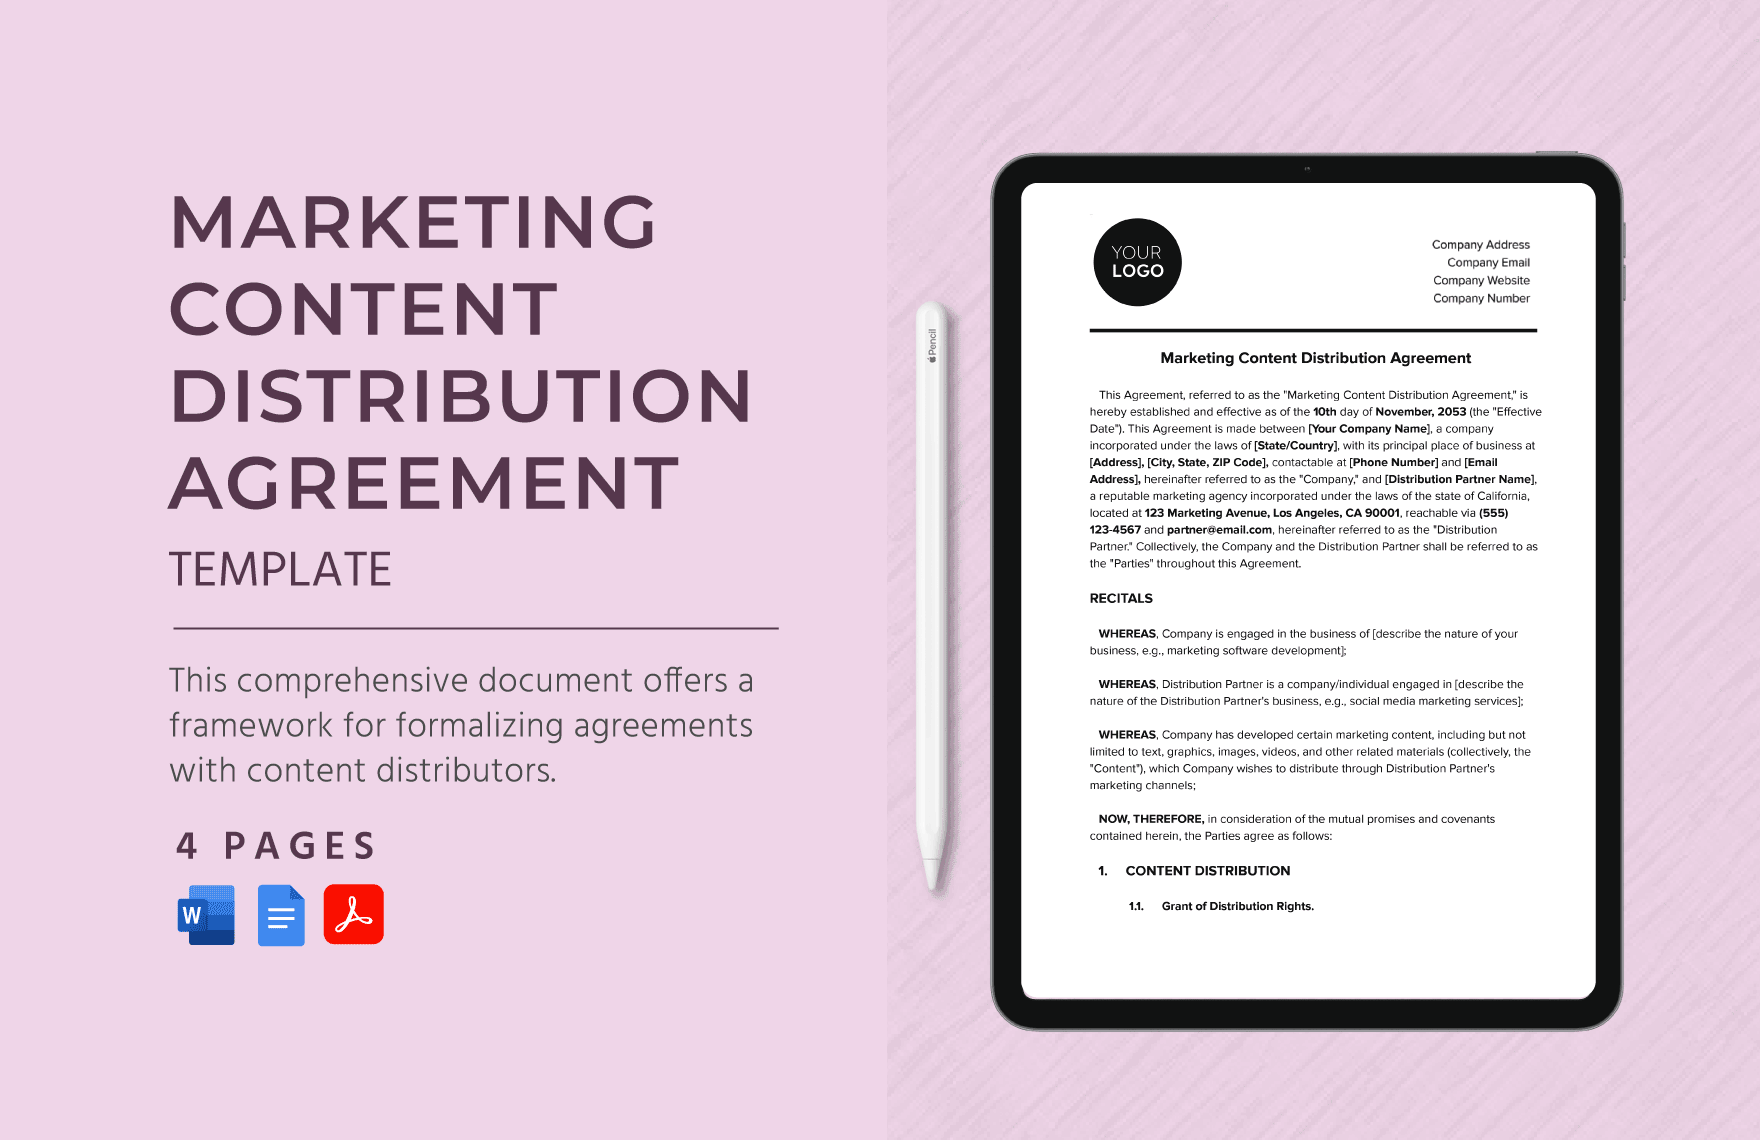 Marketing Content Distribution Agreement Template in Word, Google Docs, PDF